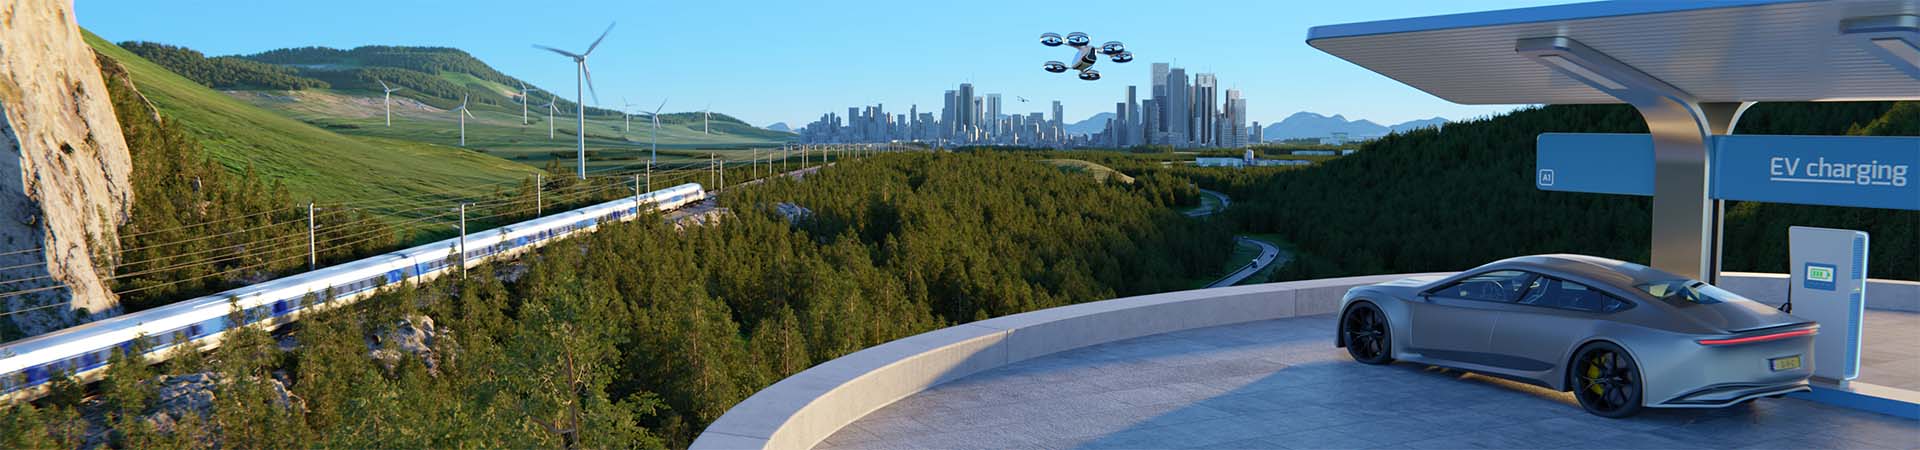 3D simulation of transportation electrification showing an ev car parked at a charging station with an electric train, wind turbines, drone, and city in the distance.